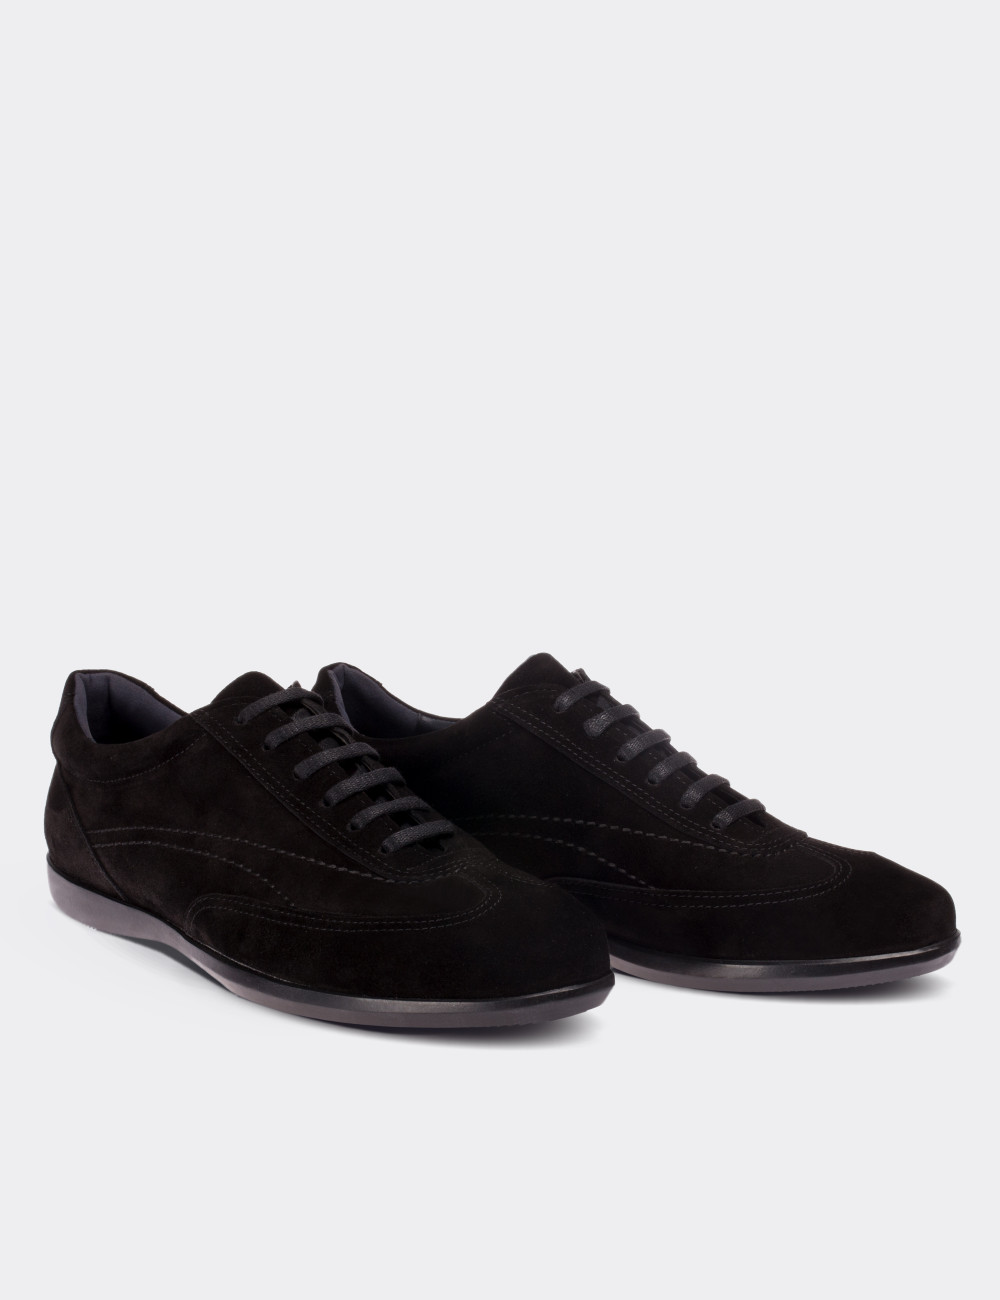 Black Suede Leather Lace-up Shoes - 00321MSYHC06